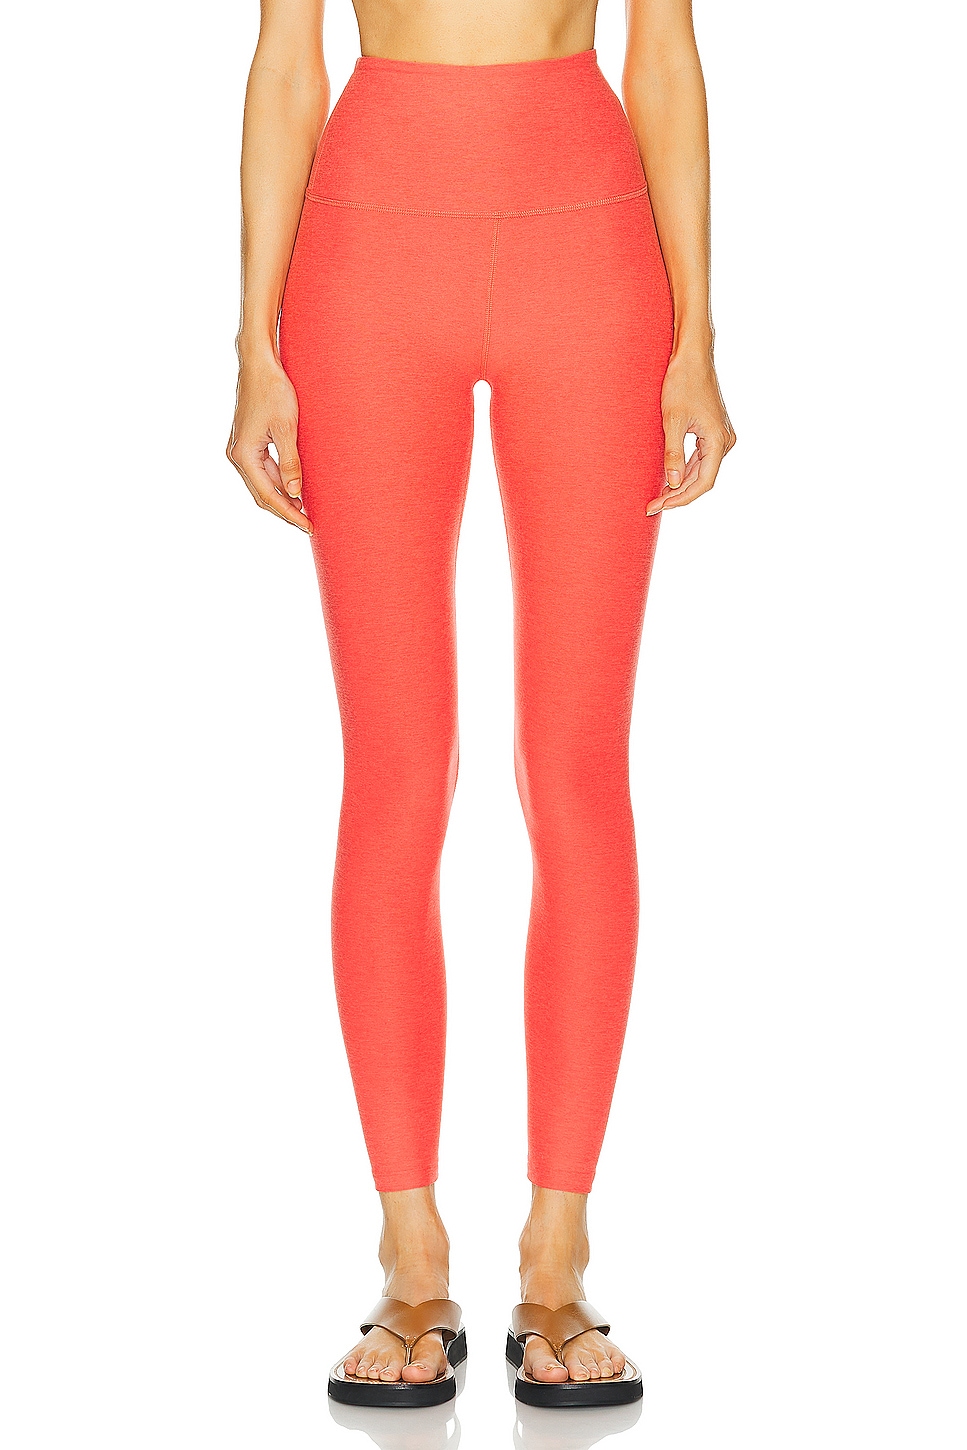 Spacedye Caught In The Midi High Waisted Legging in Coral